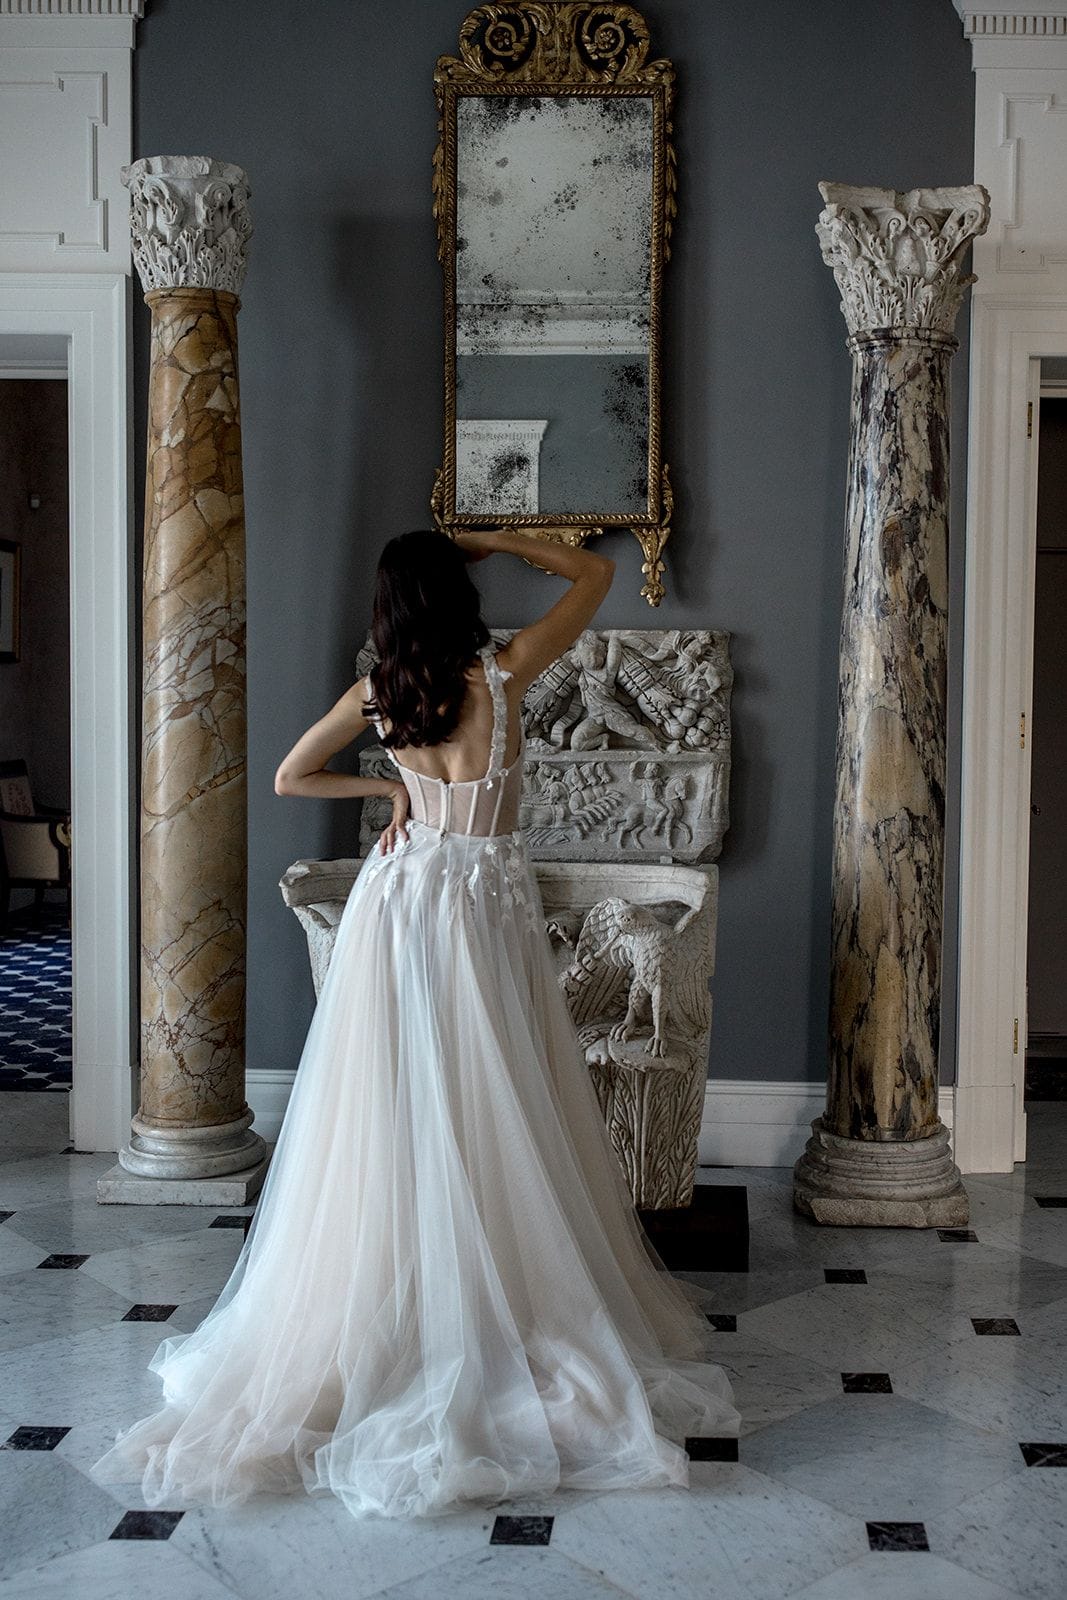 Bride stands in Villa Astor among the marble columns